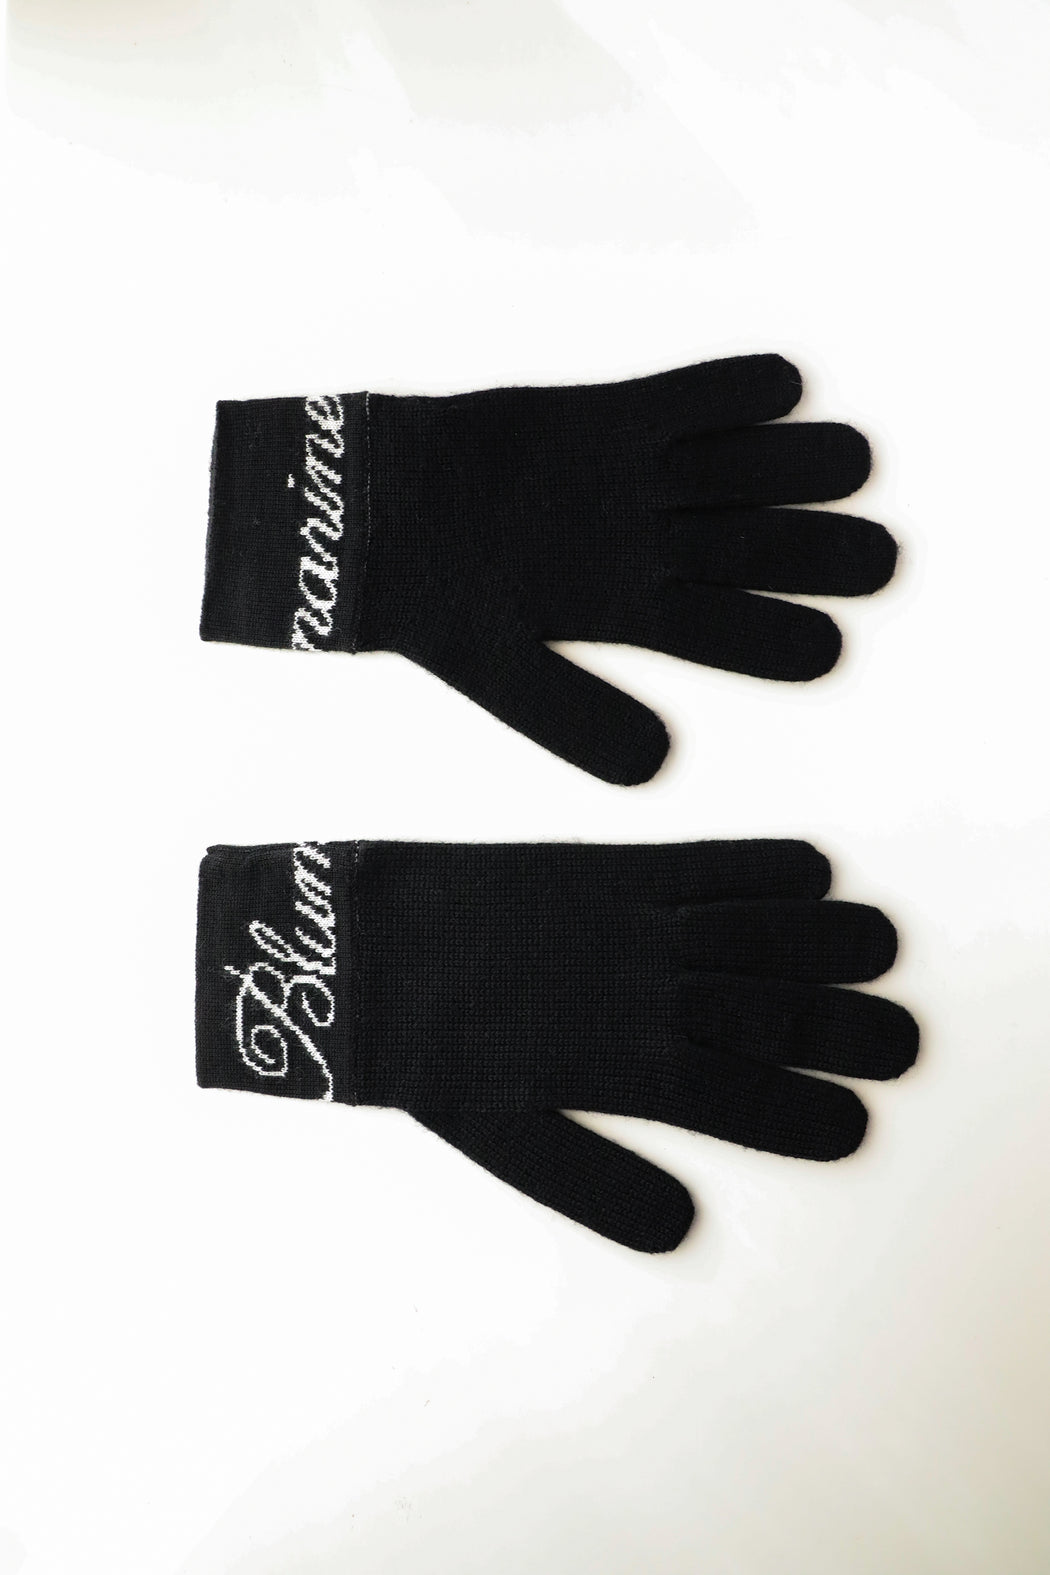 Italian Wool Cashmere Gloves in Black and White